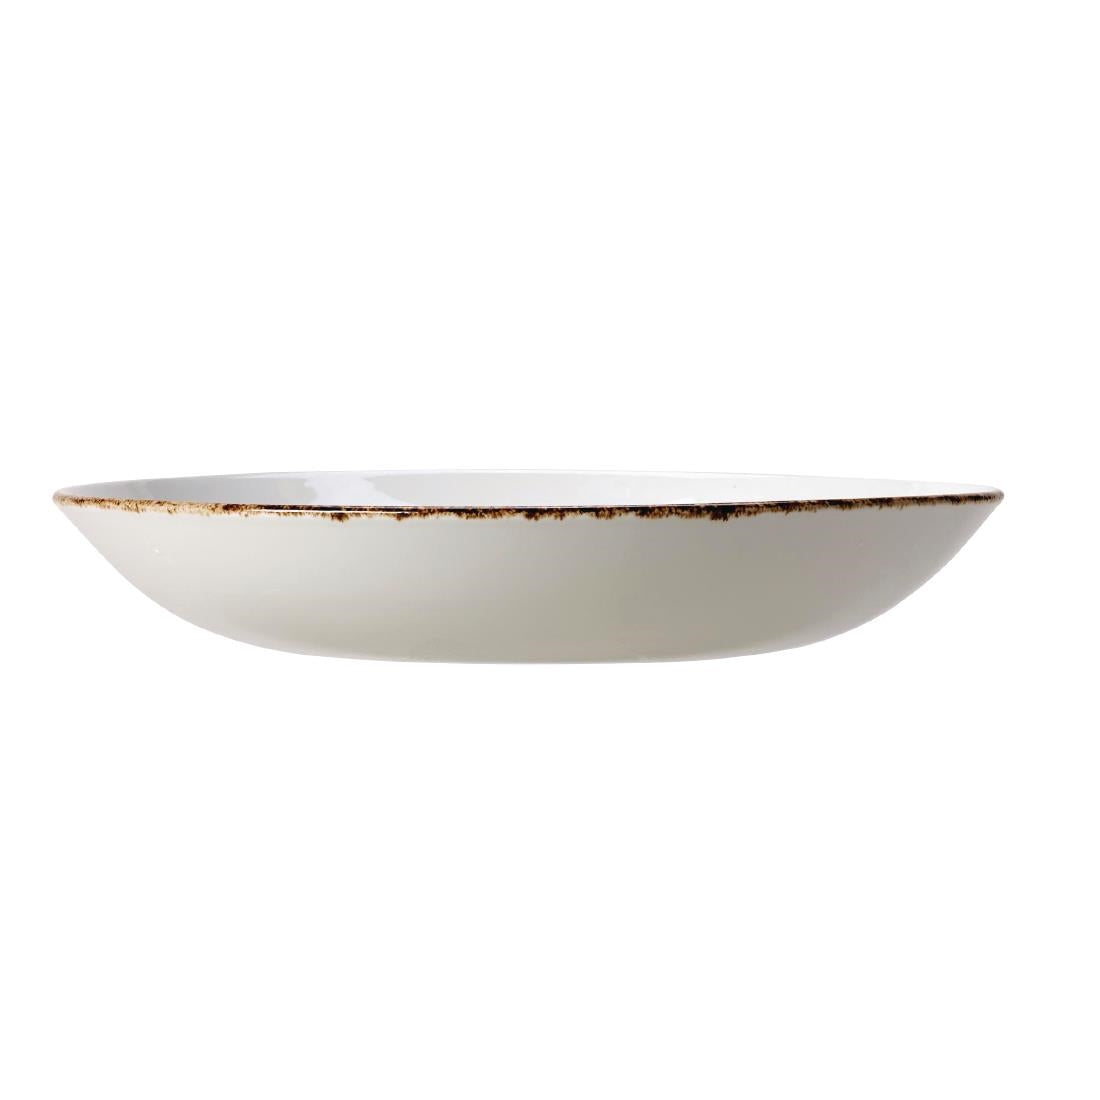 VV754 Steelite Brown Dapple Coupe Plates 230mm (Pack of 24)